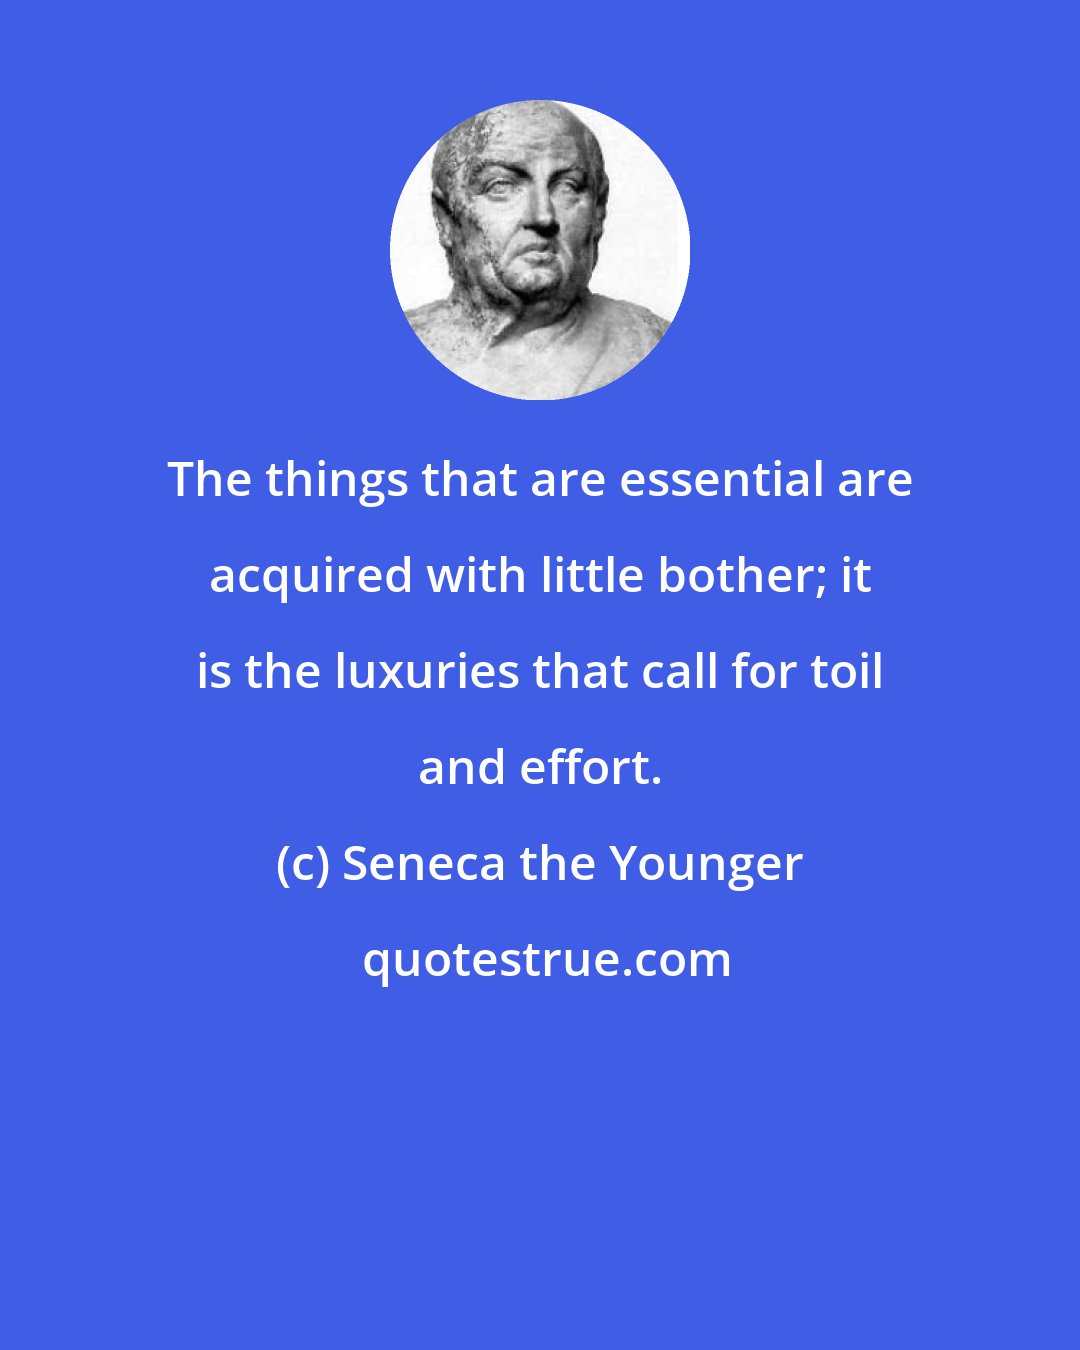 Seneca the Younger: The things that are essential are acquired with little bother; it is the luxuries that call for toil and effort.